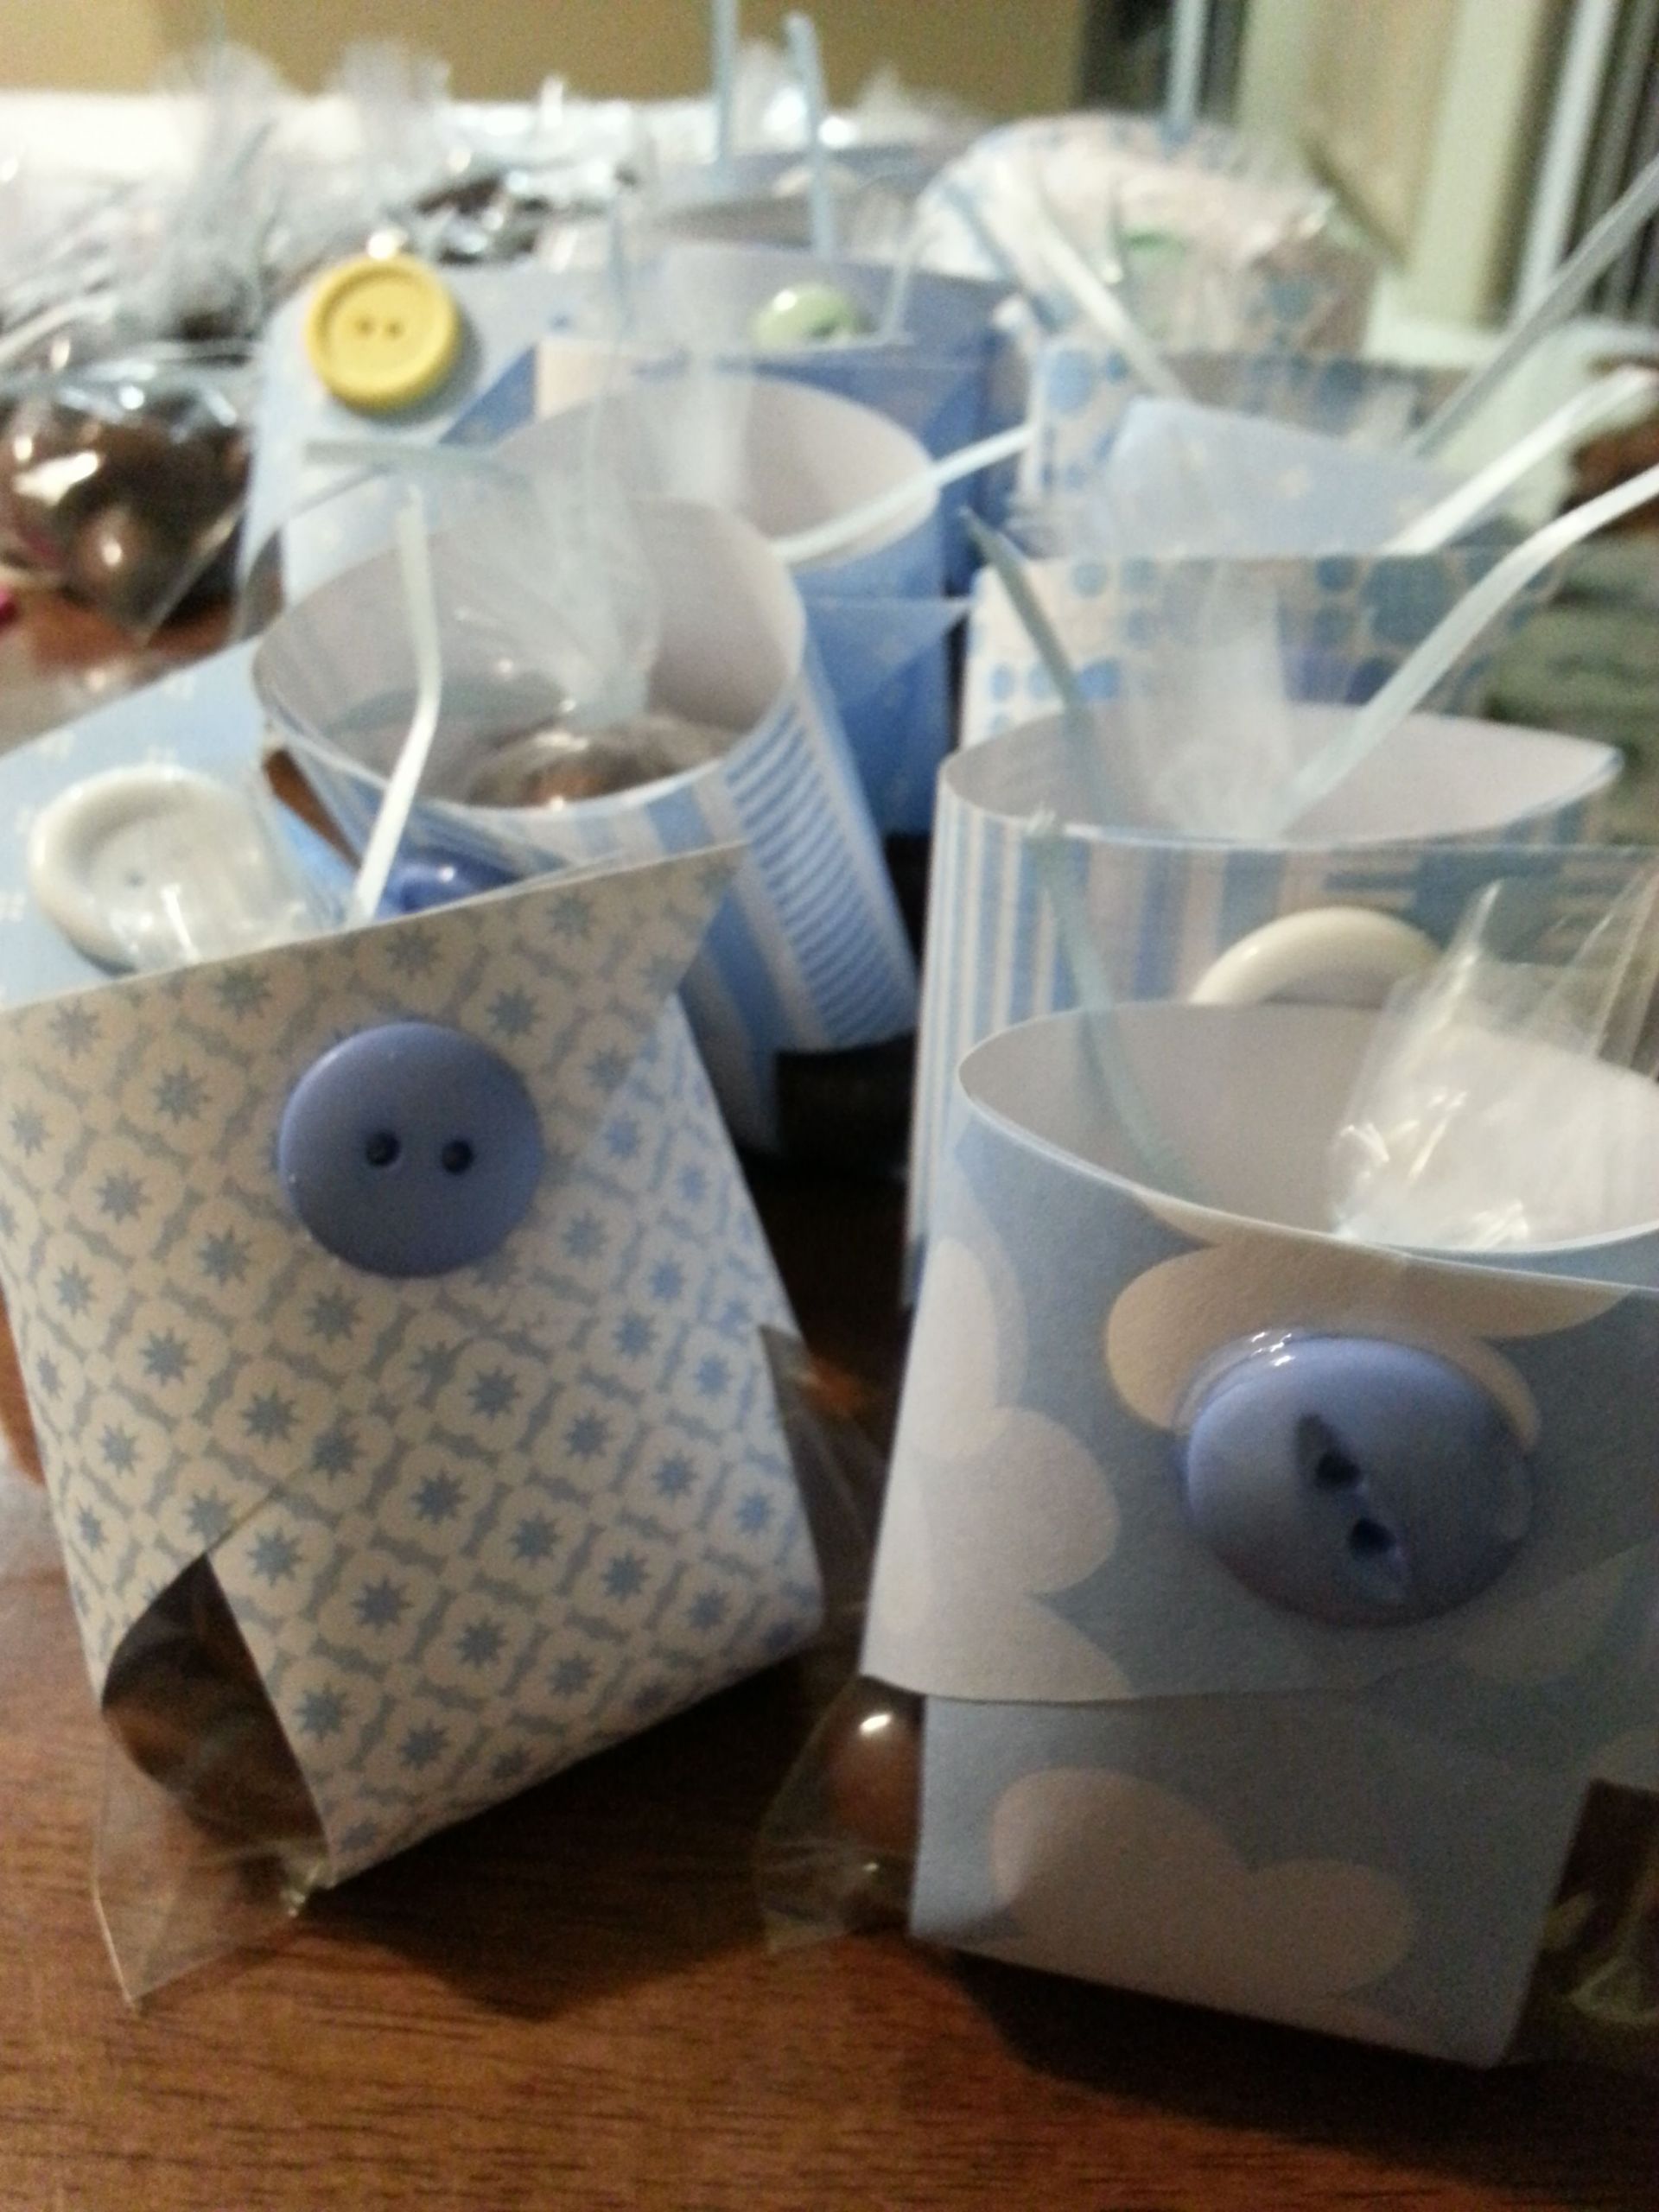 Pinterest Crafts For Baby Showers
 boy baby shower favors poopy diaper Crafts